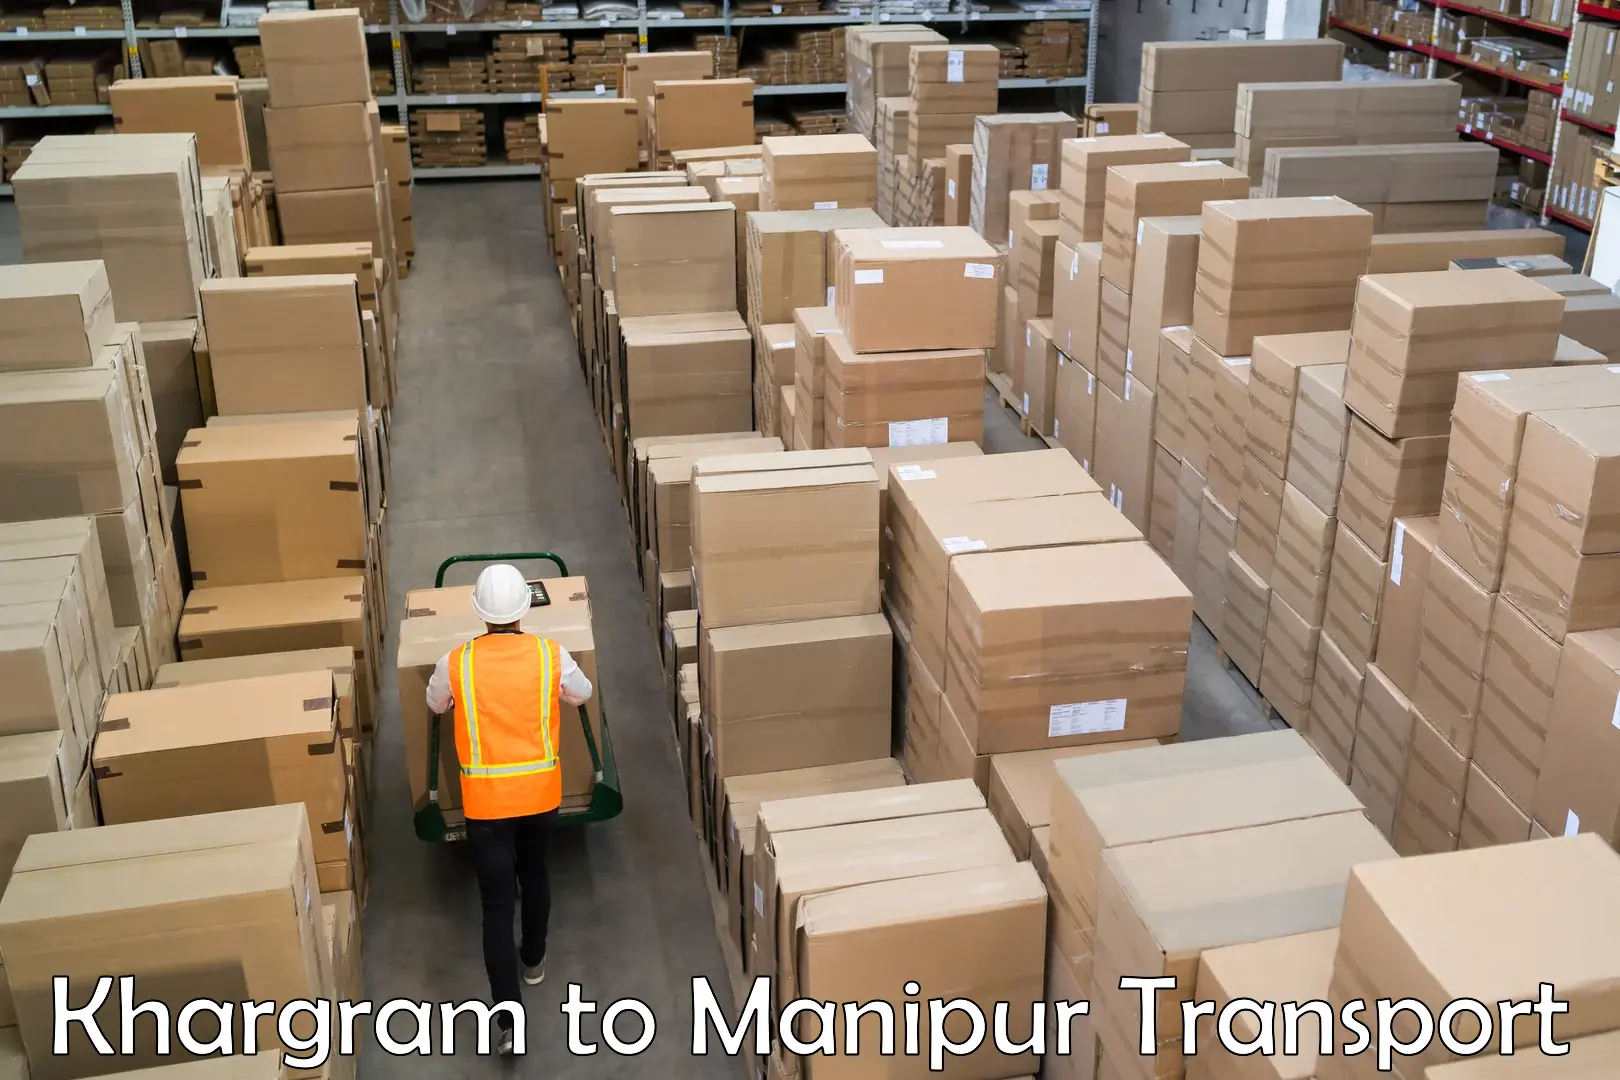 Daily parcel service transport Khargram to Manipur